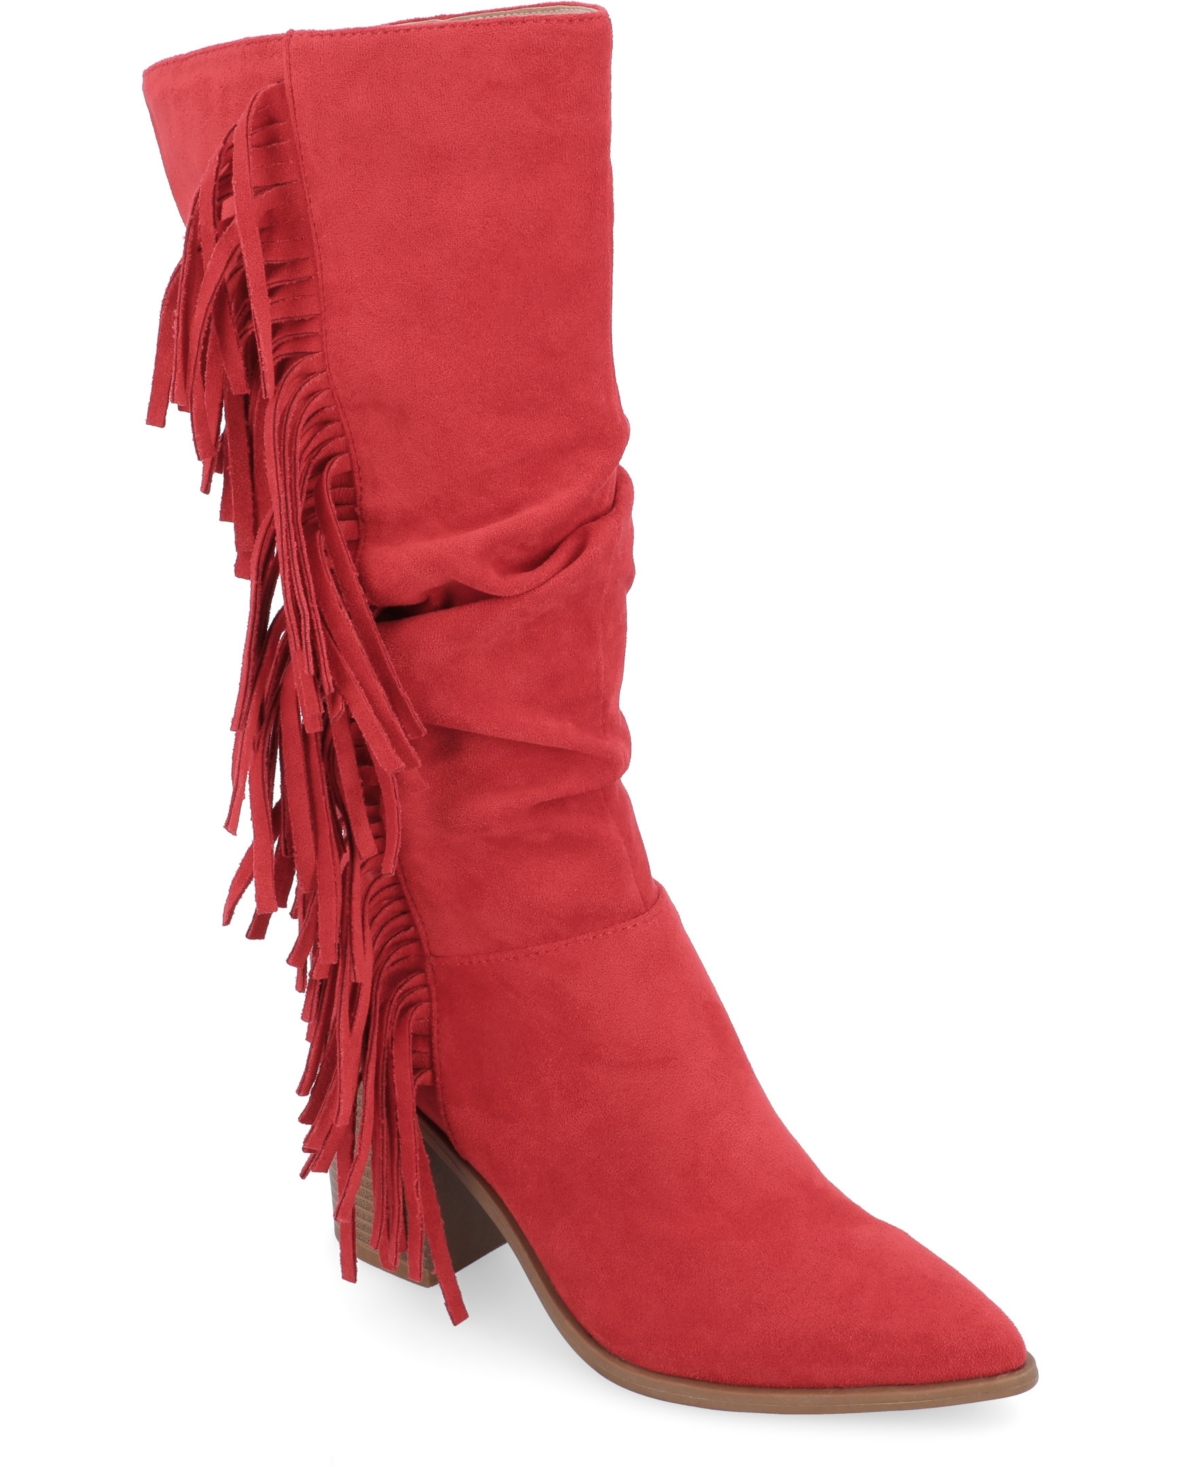 JOURNEE COLLECTION WOMEN'S HARTLY WESTERN FRINGE BOOTS